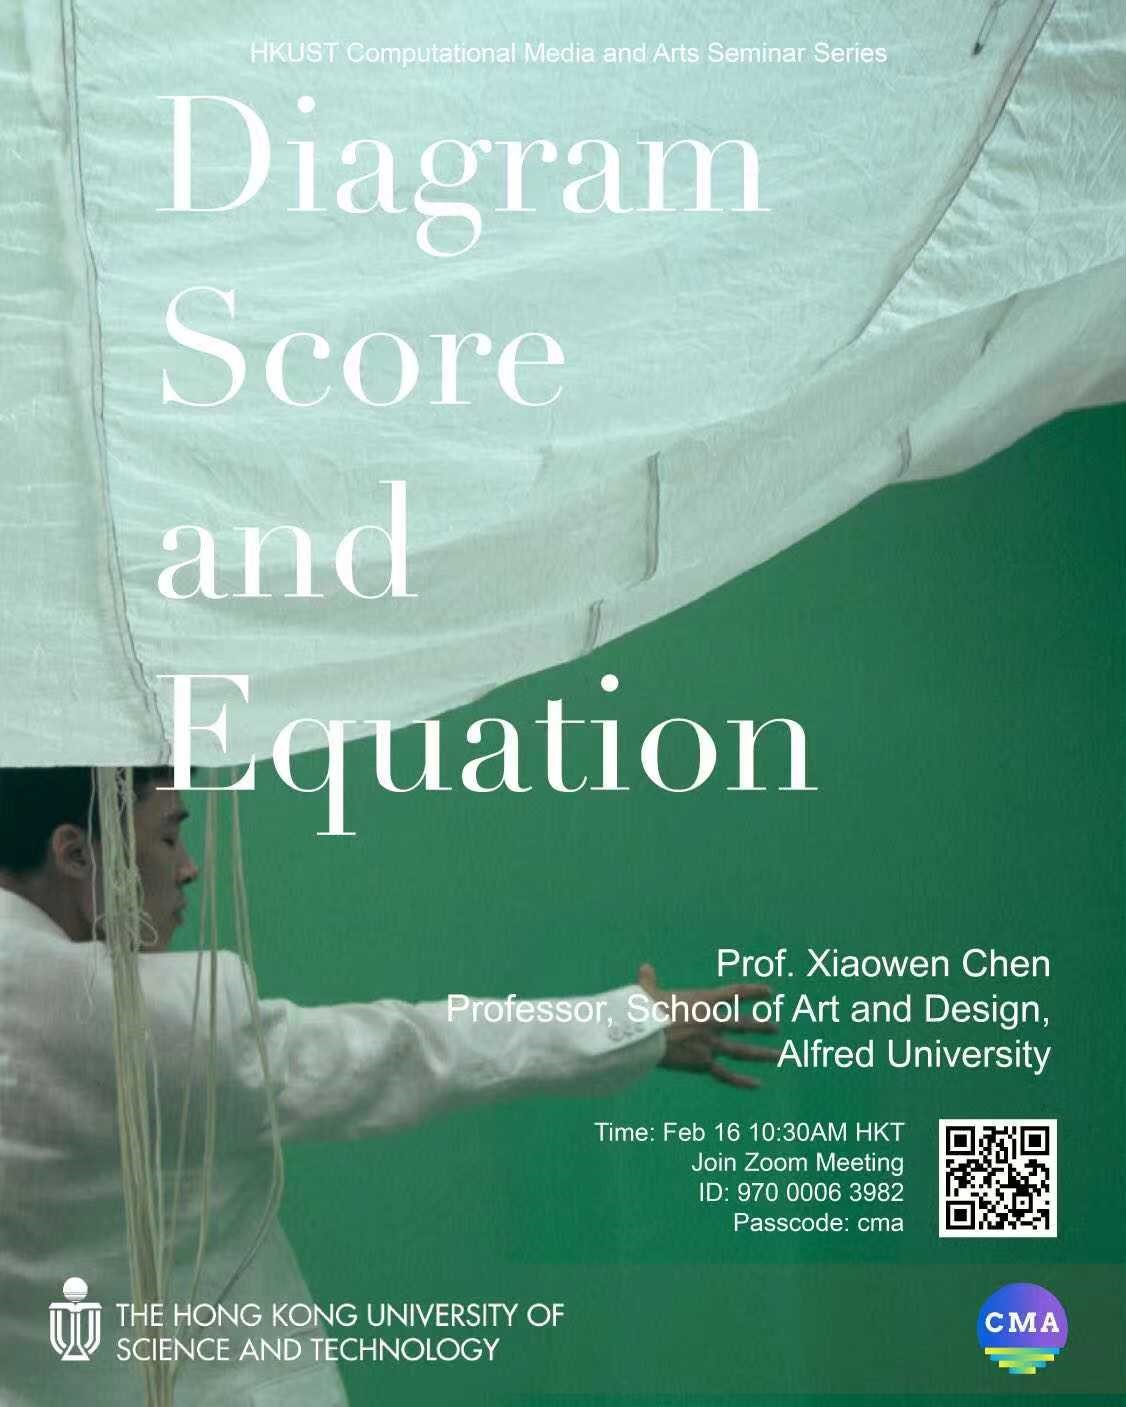 Professor Xiawen Chen School of Art and Design at Alfred University Presents a Seminar “Diagram Score and Equation" at The Hong Kong University of Science and Technology Feb 16th 10:30AM HKT Join zoom Meeting ID 9700006382 passcode:cma